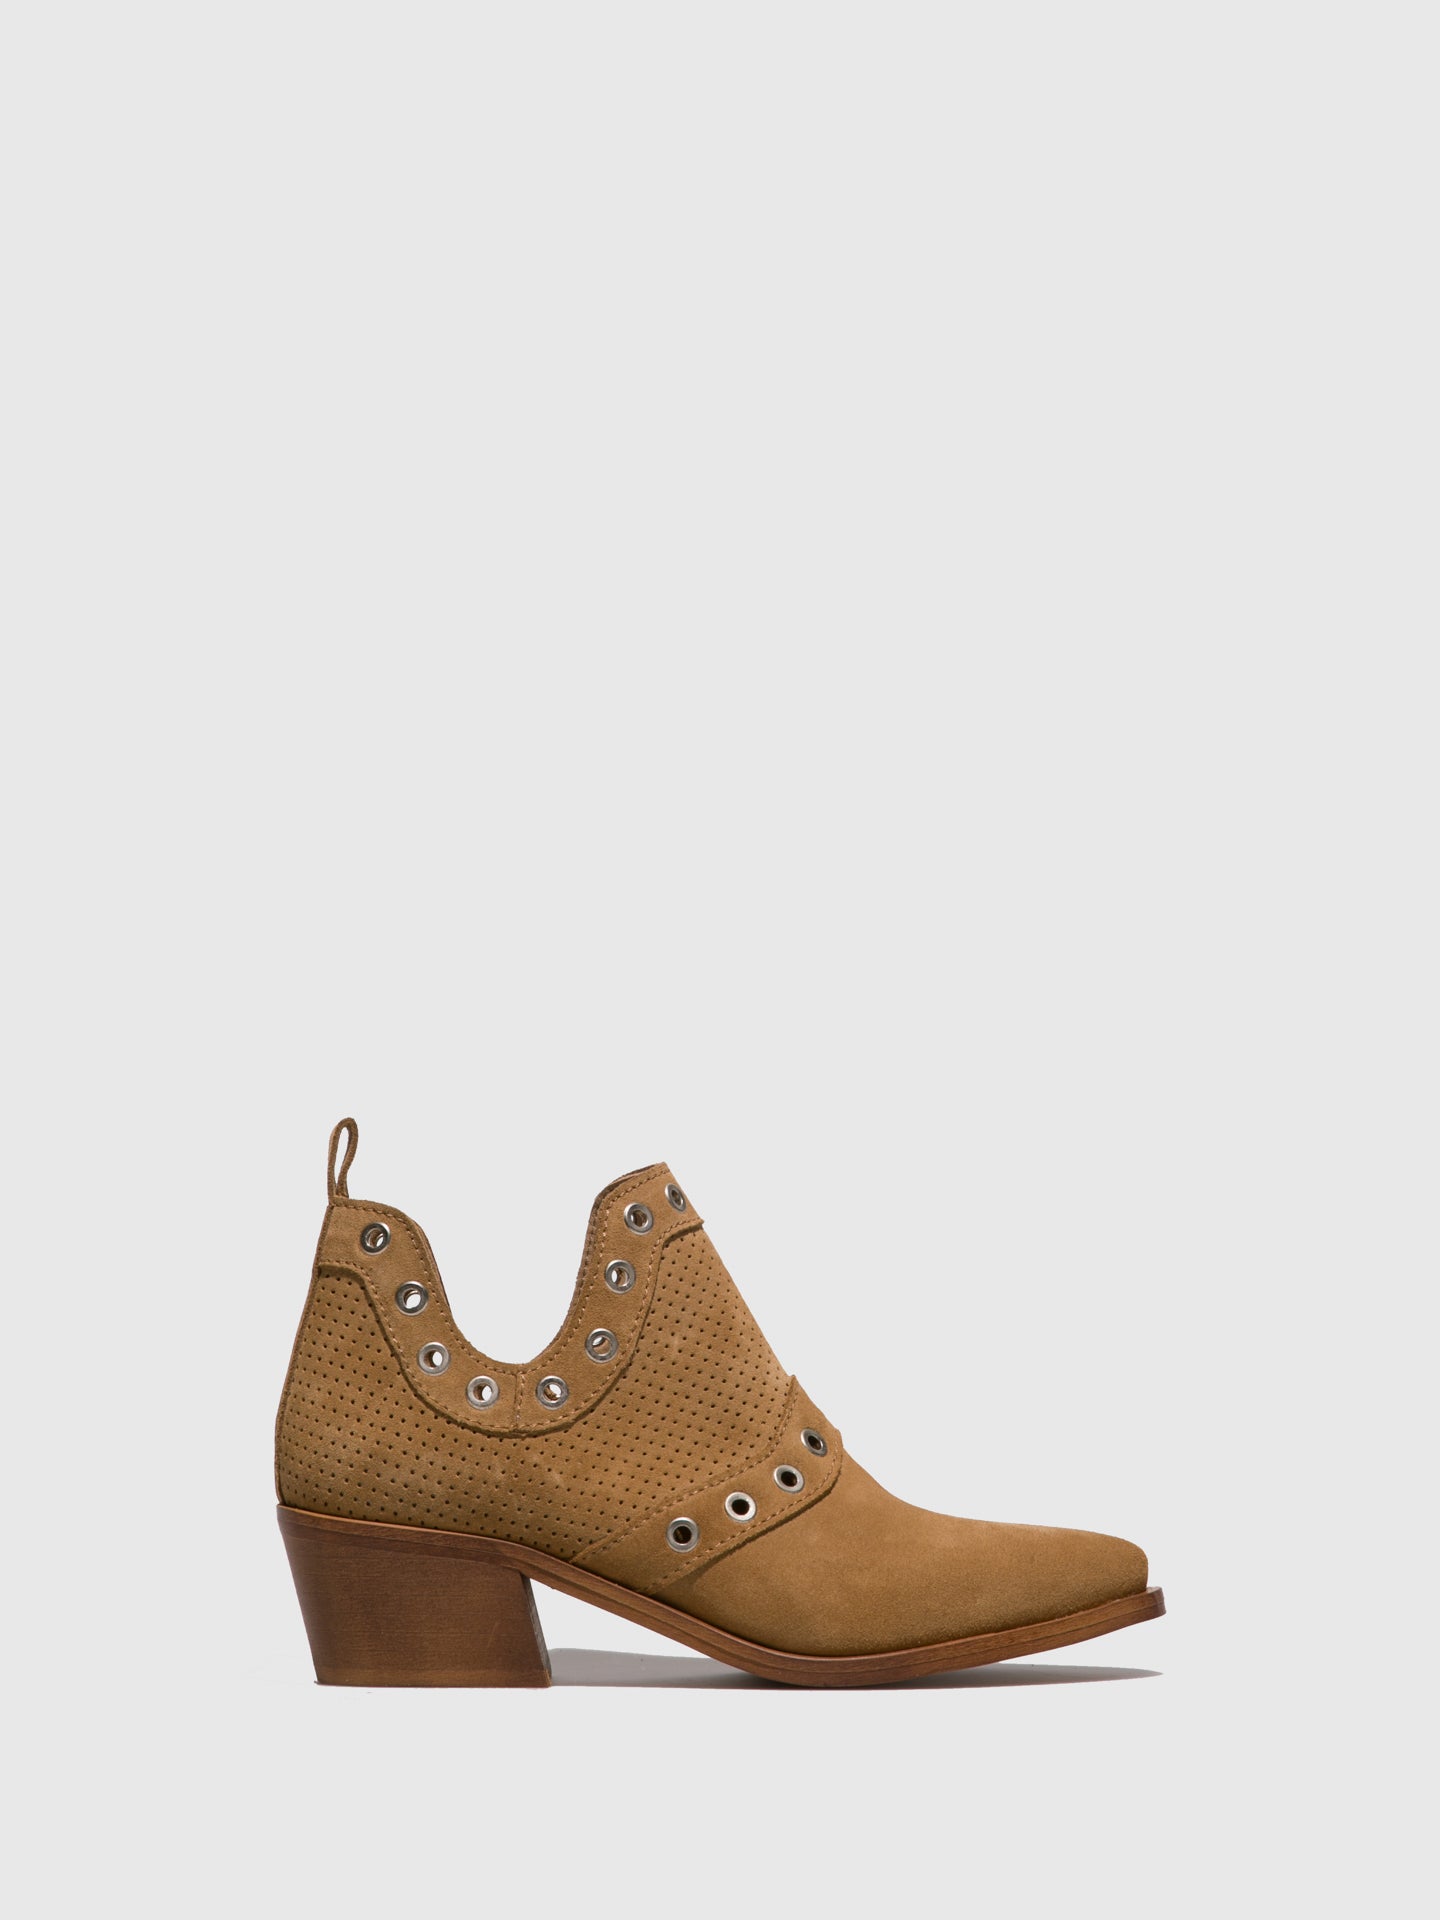 Foreva Peru Cowboy Ankle Boots